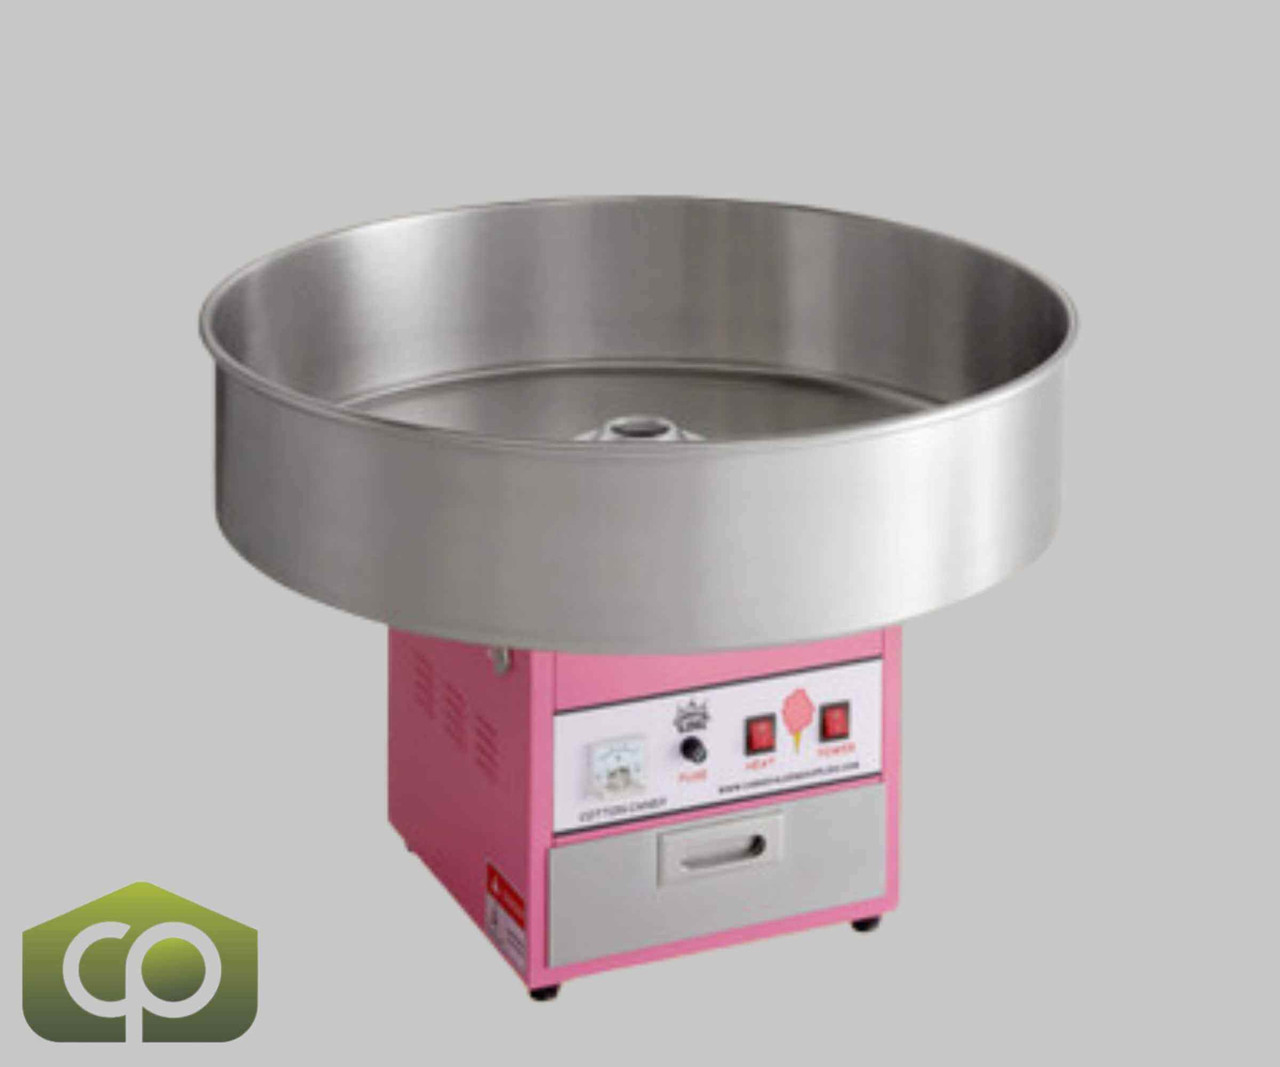 Chicken Pieces Professional Cotton Candy Machine with 28" Stainless Steel Bowl